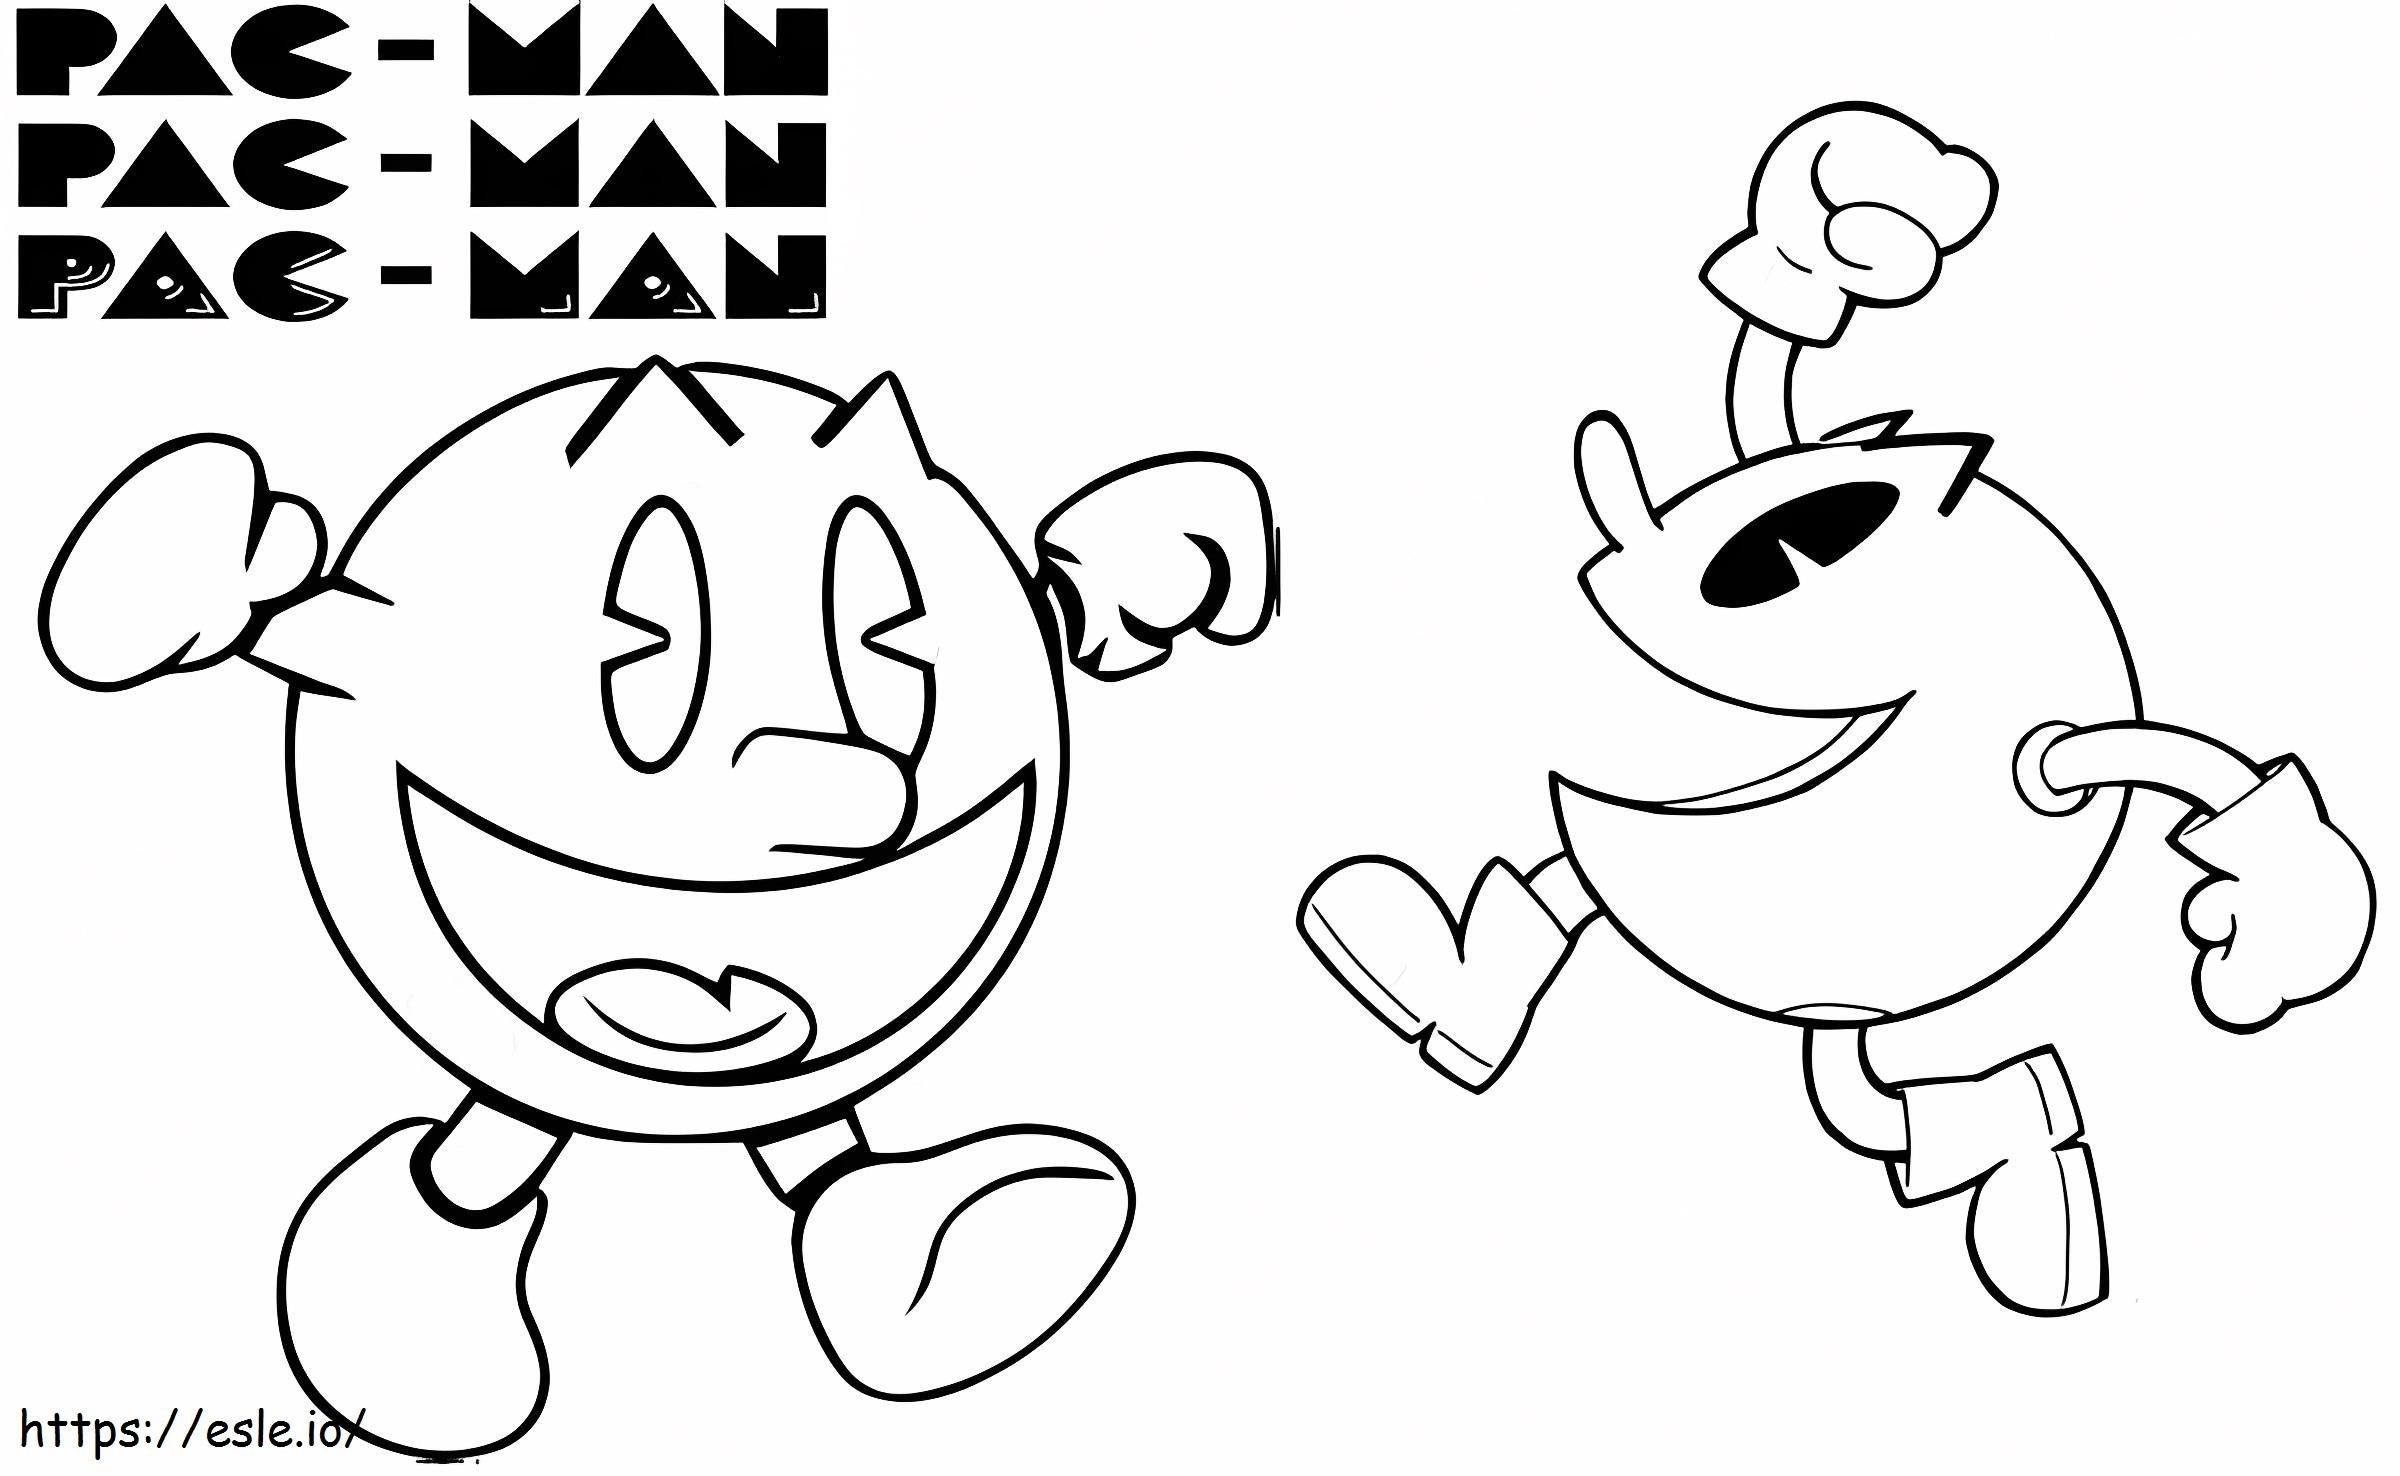 Two Pacman coloring page